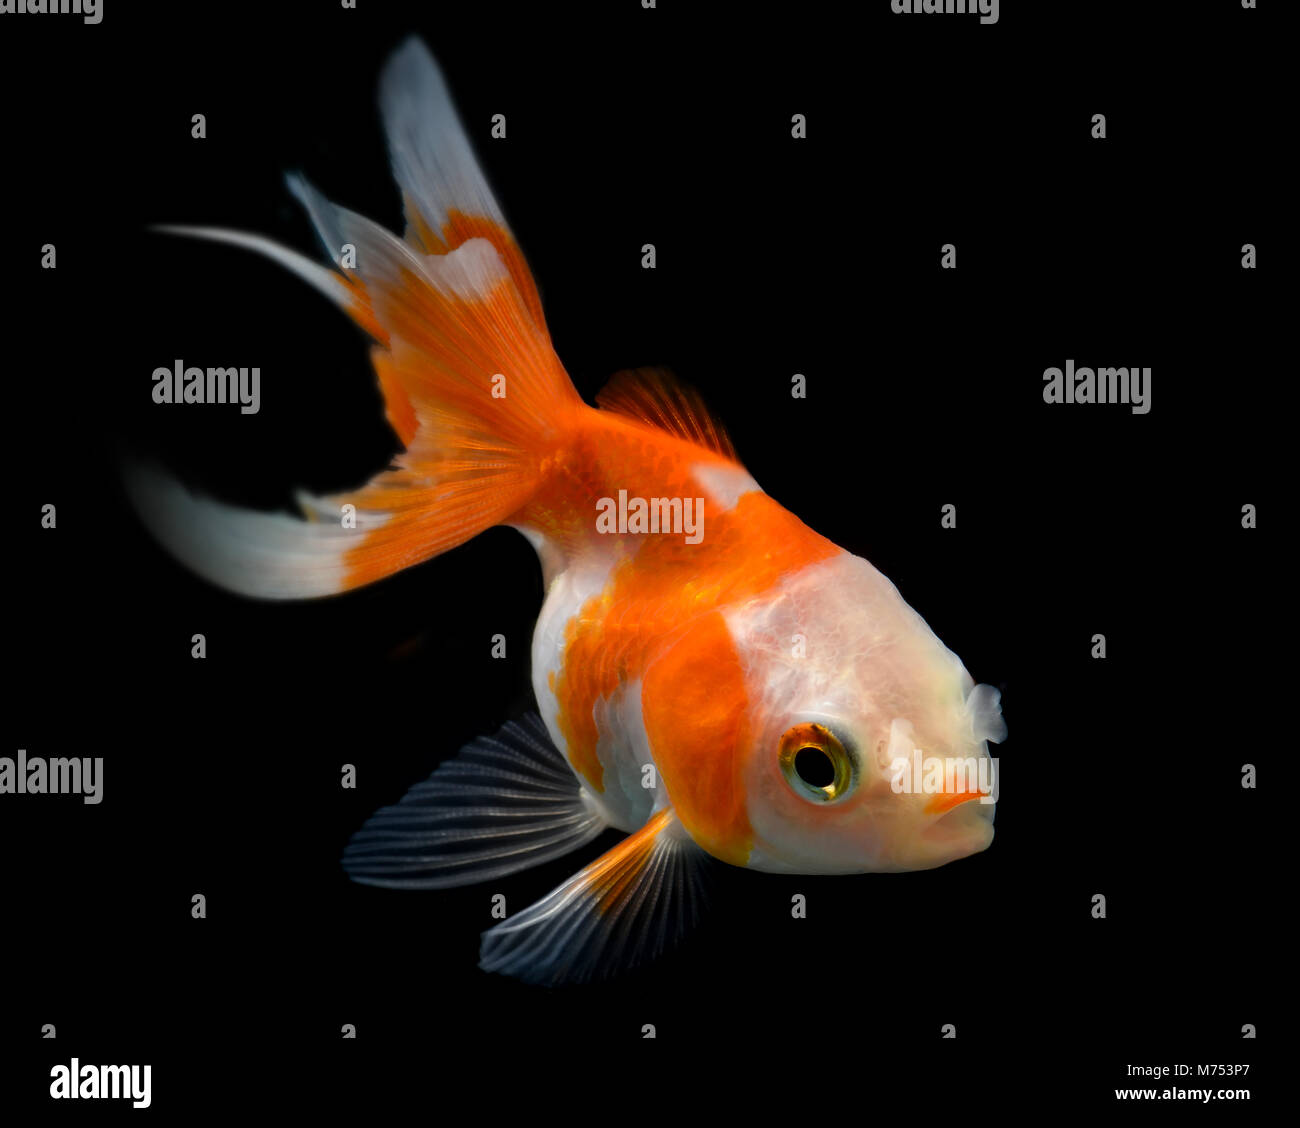 Young golden fish in fish tank with black background and flash studio lighting. Stock Photo